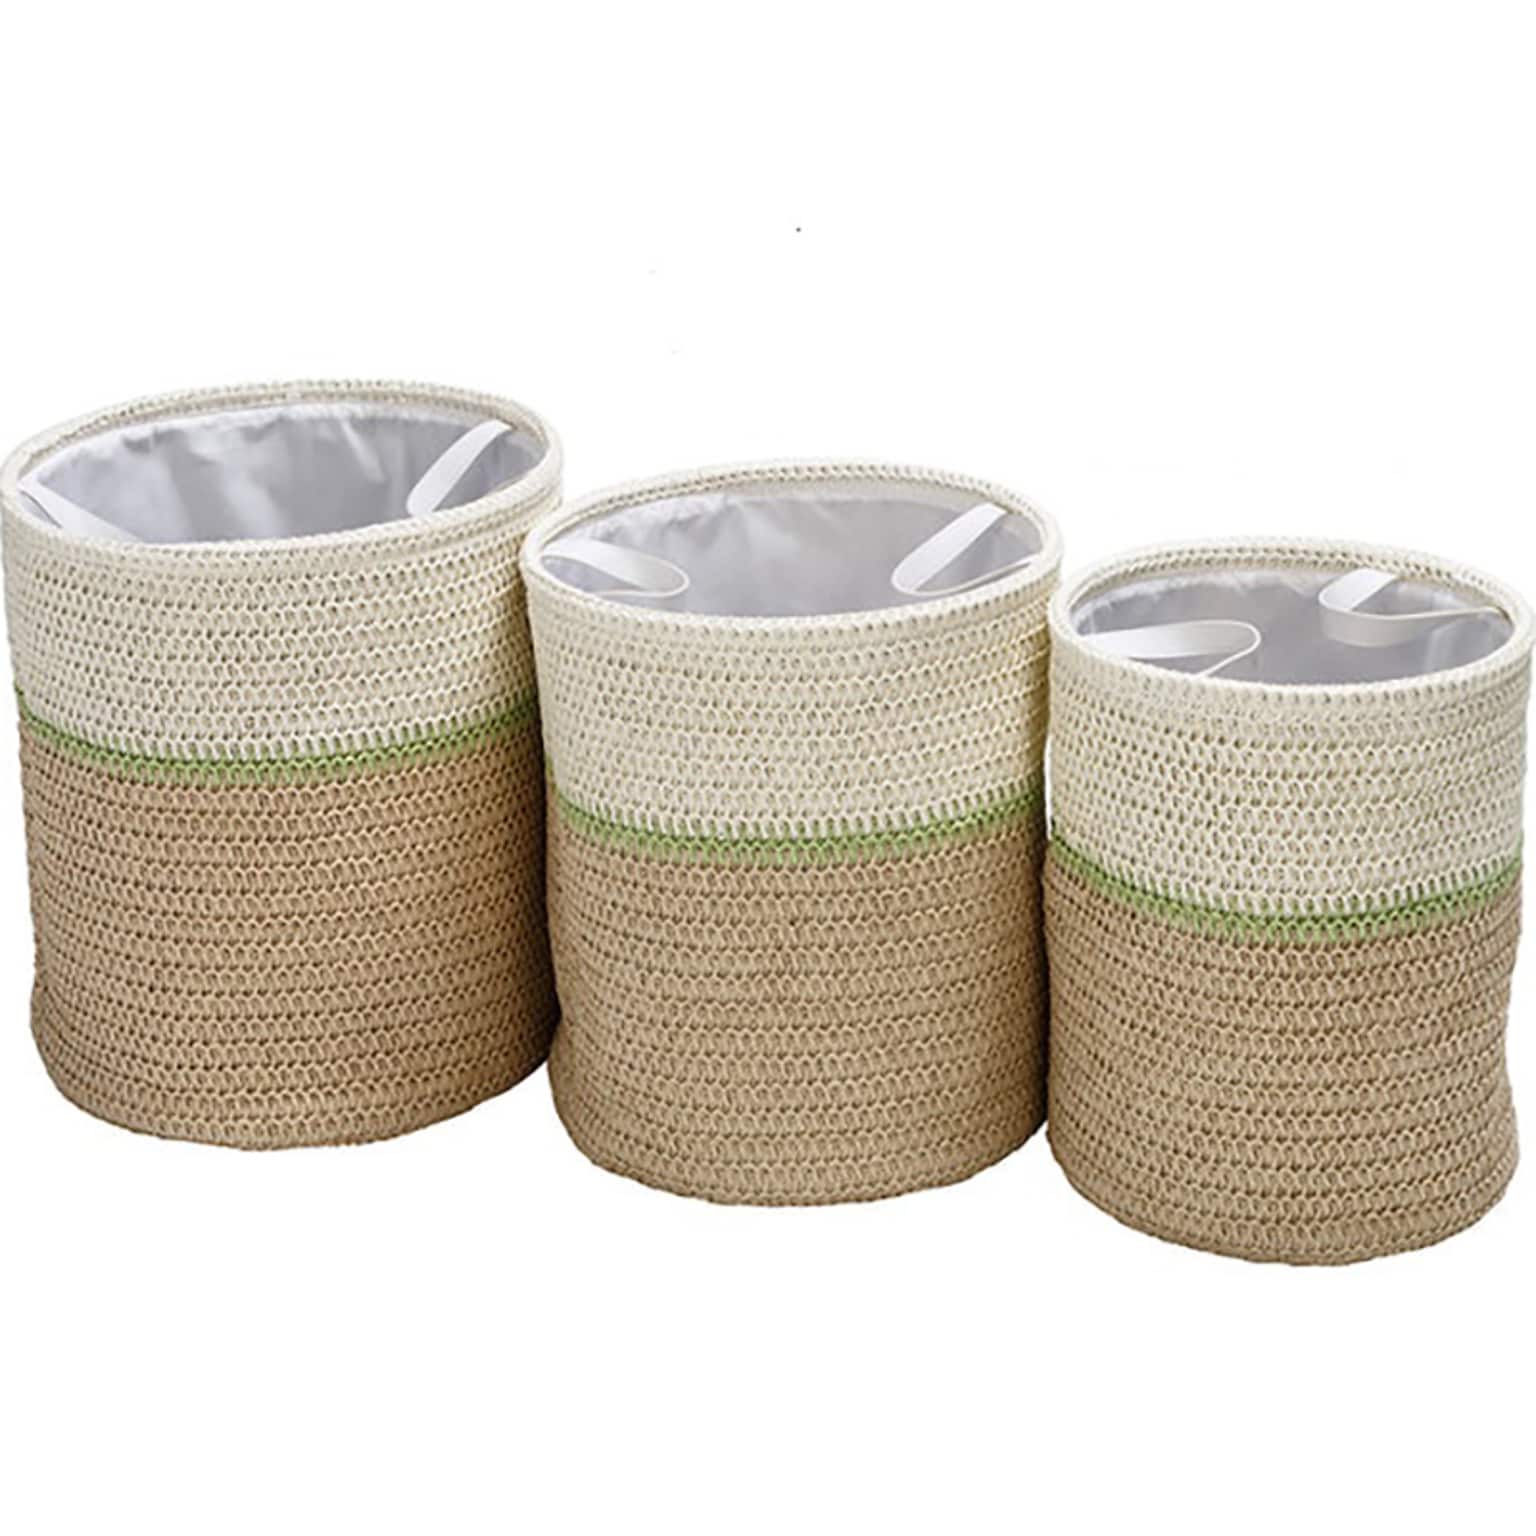 Honey-Can-Do Small Nesting Baskets with Handles, Green/White, 3/Set (STO-09534)